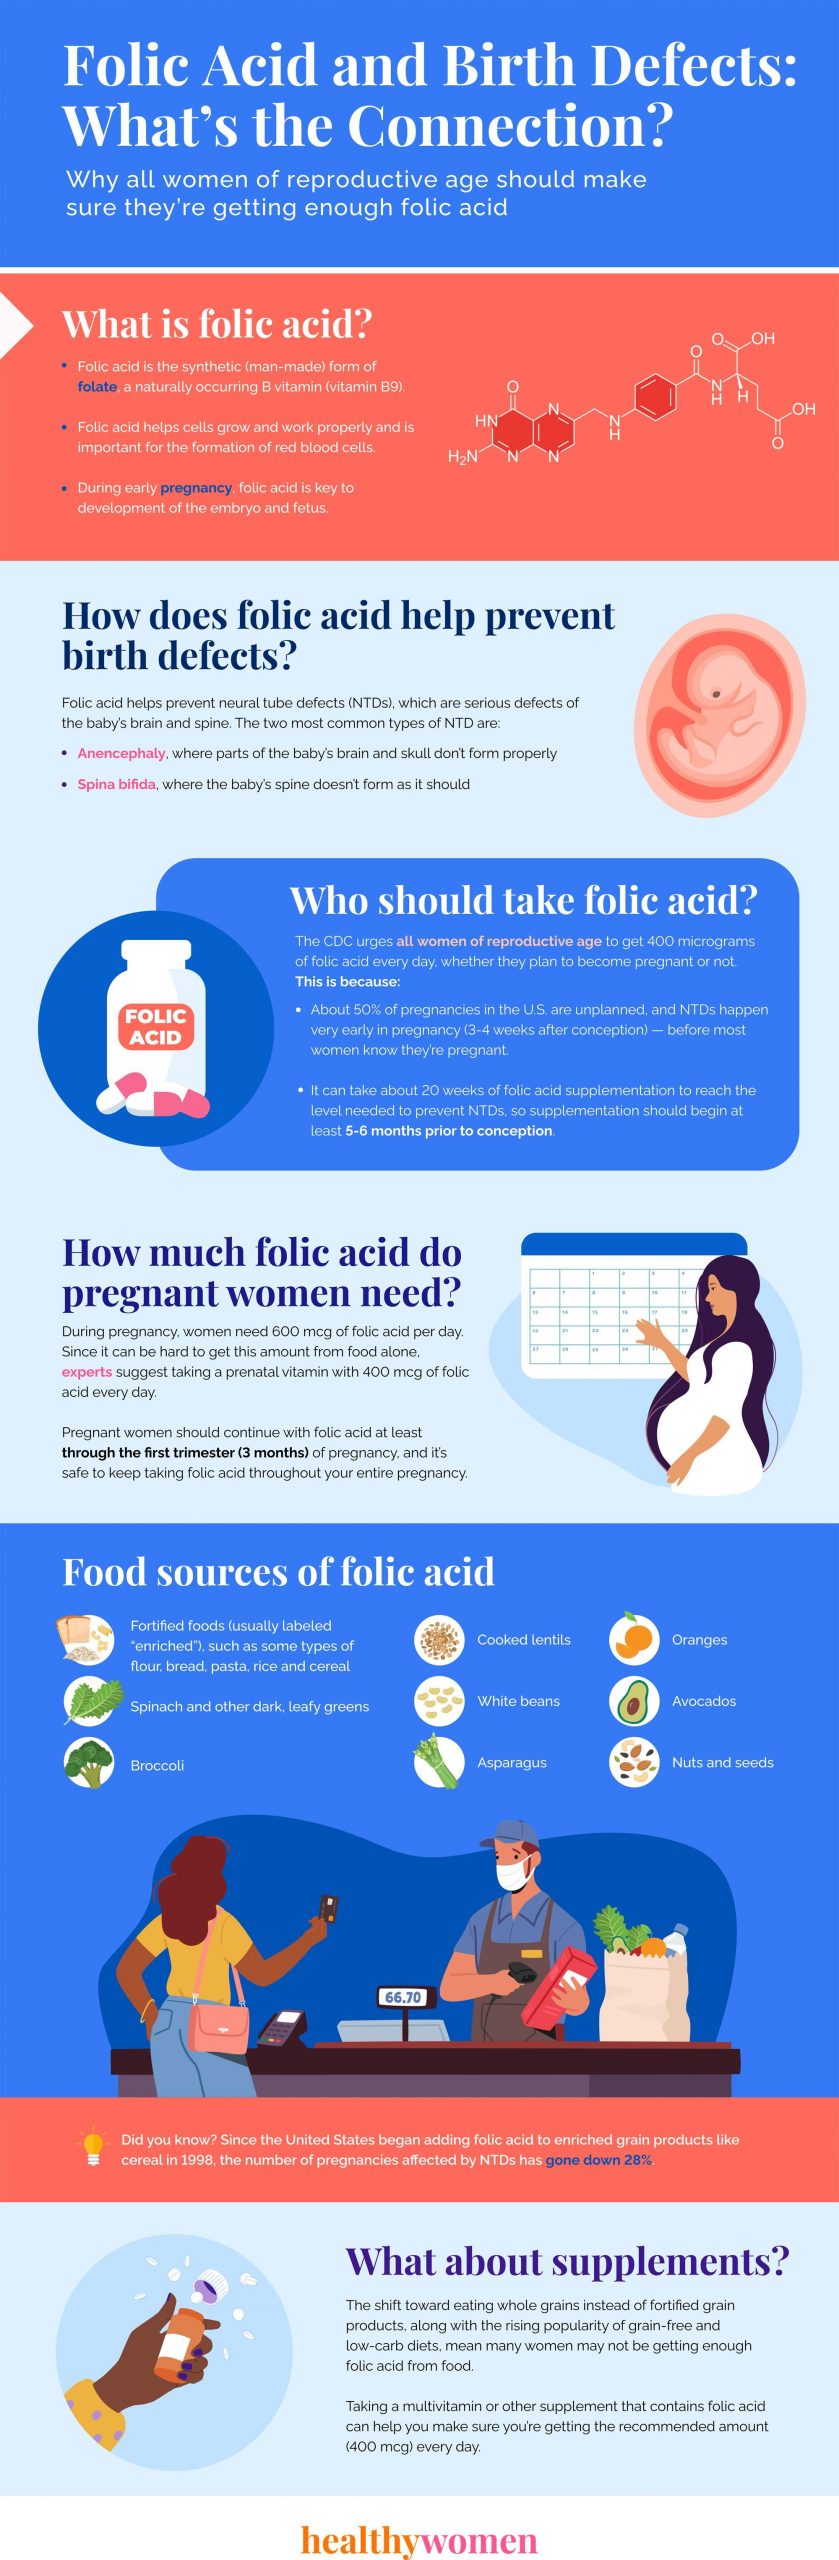 Folic Acid and Birth Defects: Whatu2019s the Connection? Infographic - Click the image to open PDF